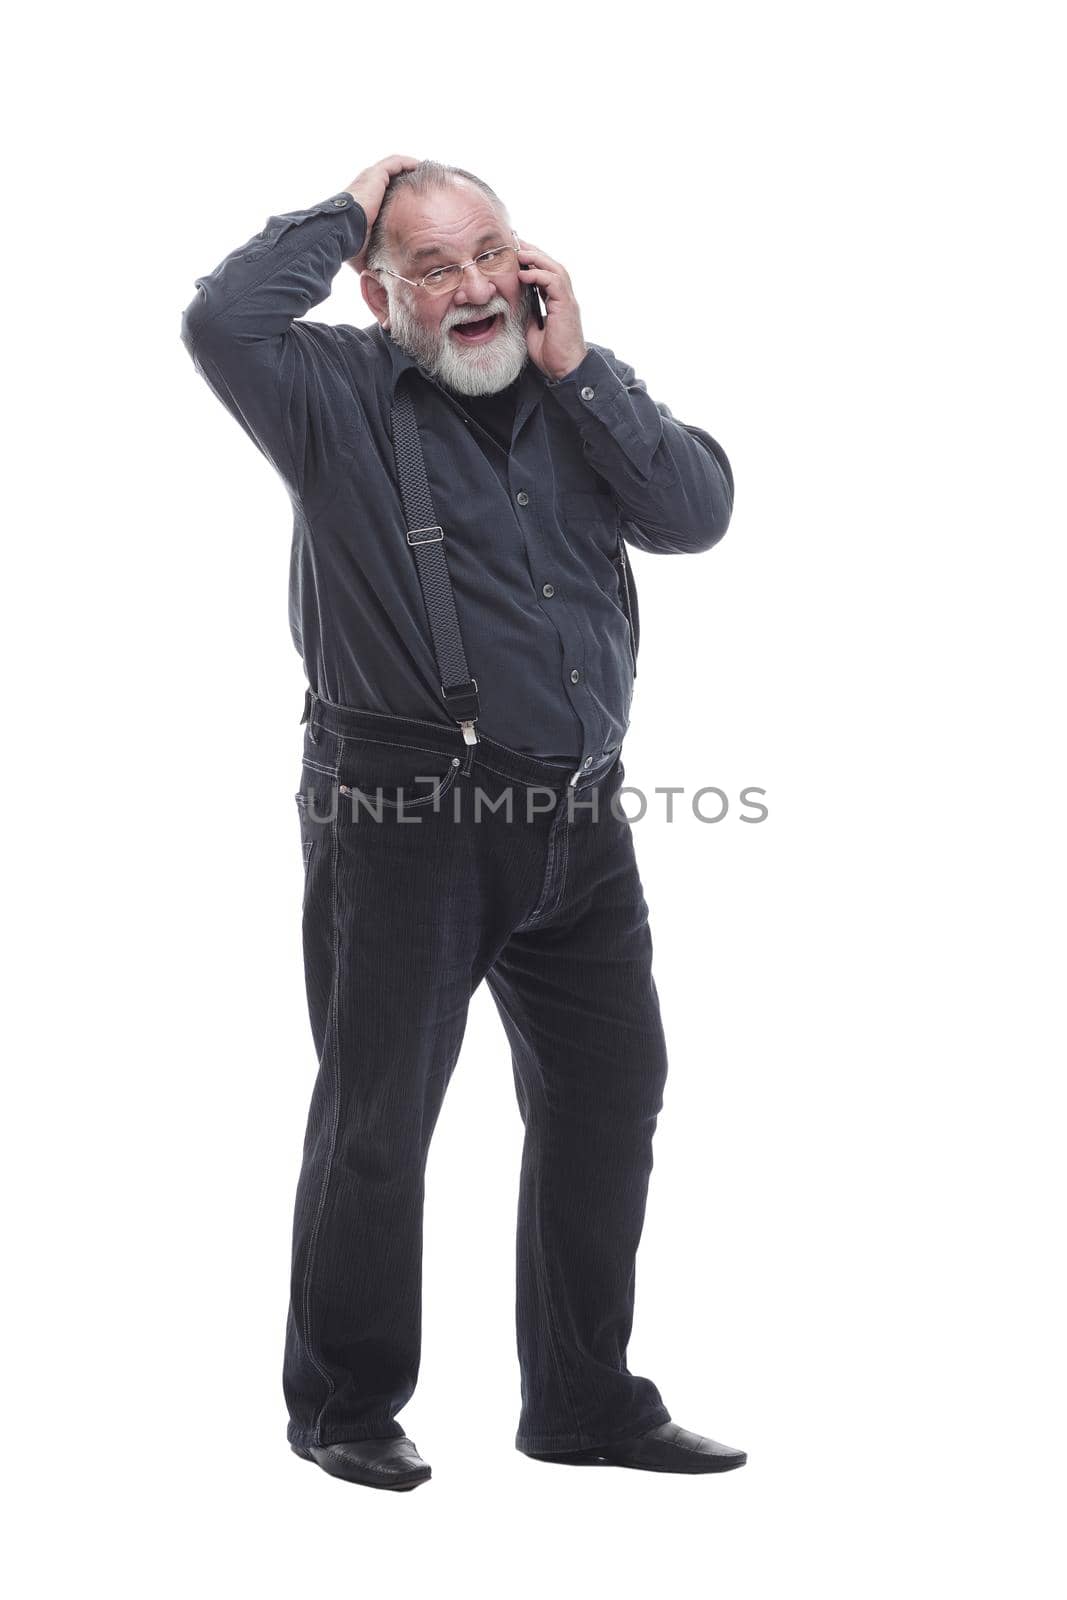 in full growth. friendly elderly man with a smartphone. isolated on a white